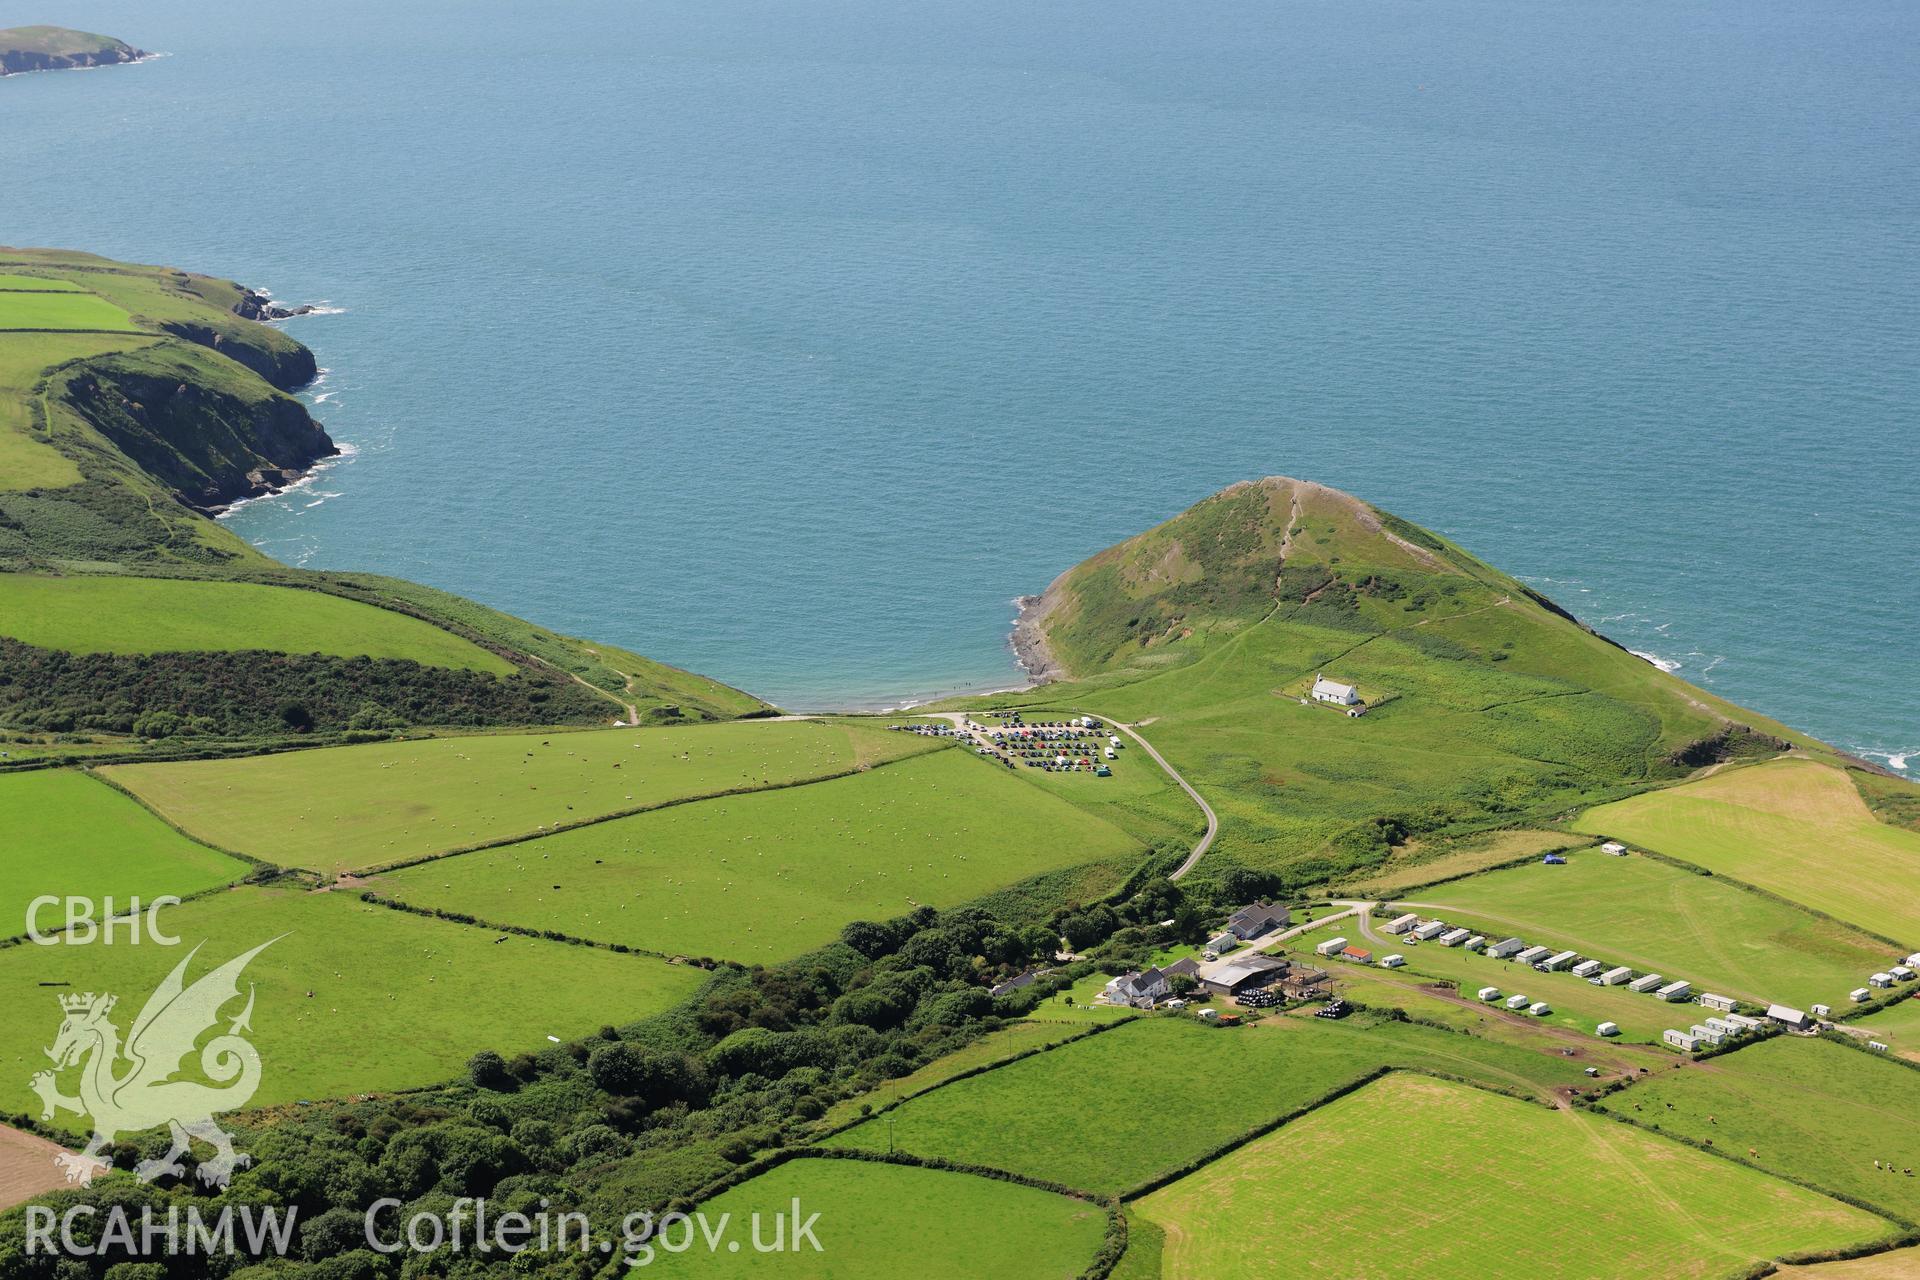 RCAHMW colour oblique photograph of Holy Cross Church, Mwnt. Taken by Toby Driver on 27/07/2012.